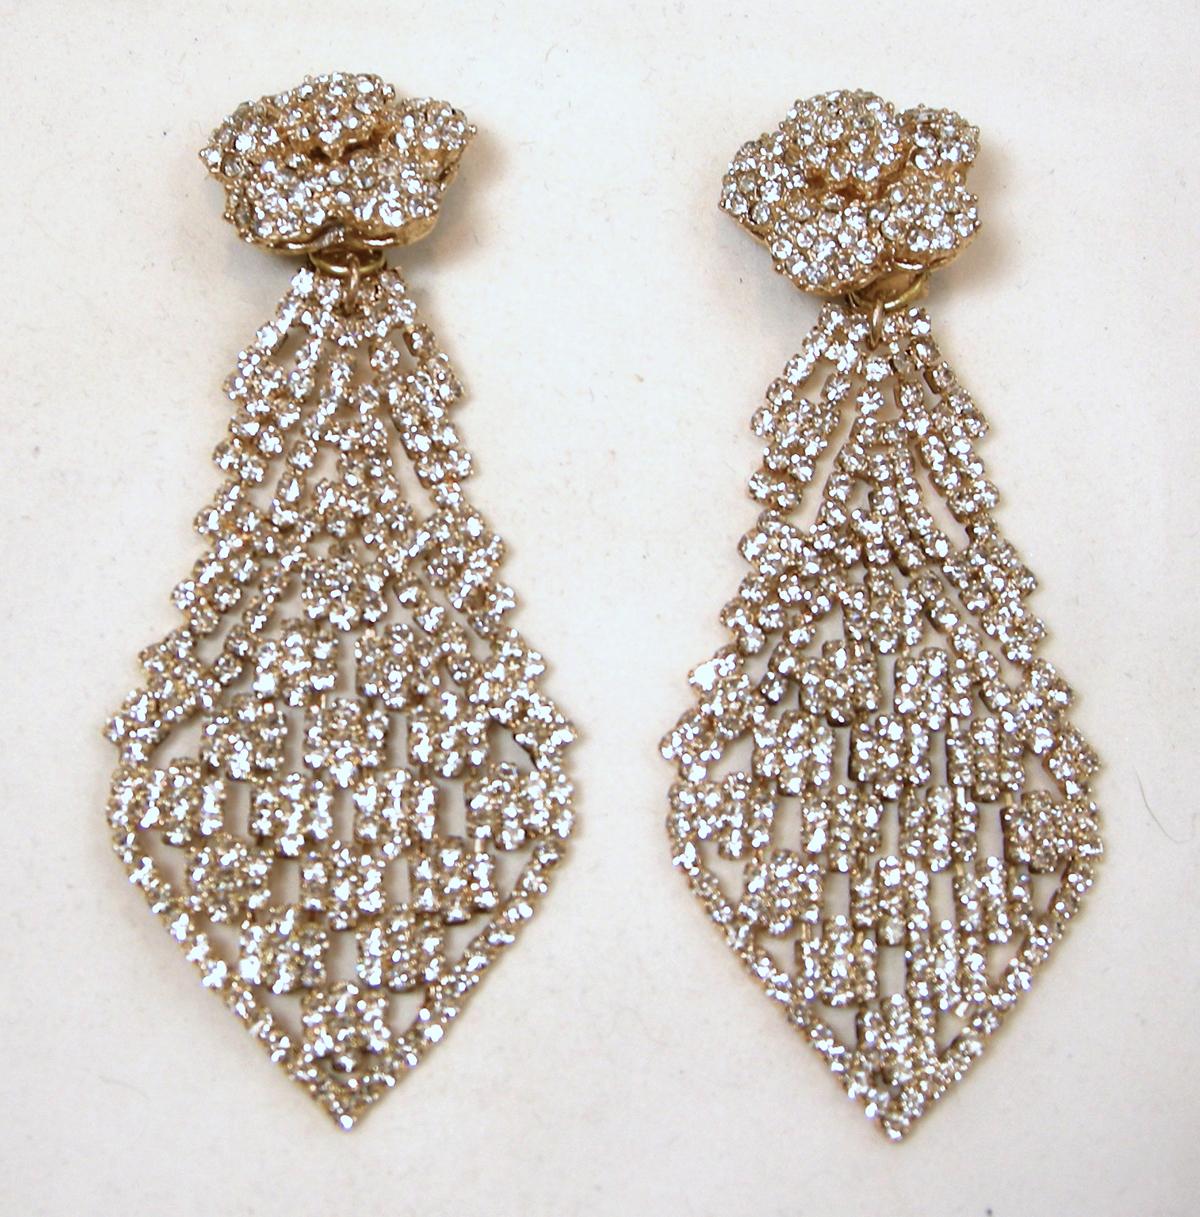 These runway earrings are signed DeMario.  They have a crystal floral top that leads down to a long crystal lace drop in a gold tone metal setting. In excellent condition, these clip earrings measure 4” x 1-1/2” and are signed “De Mario”.